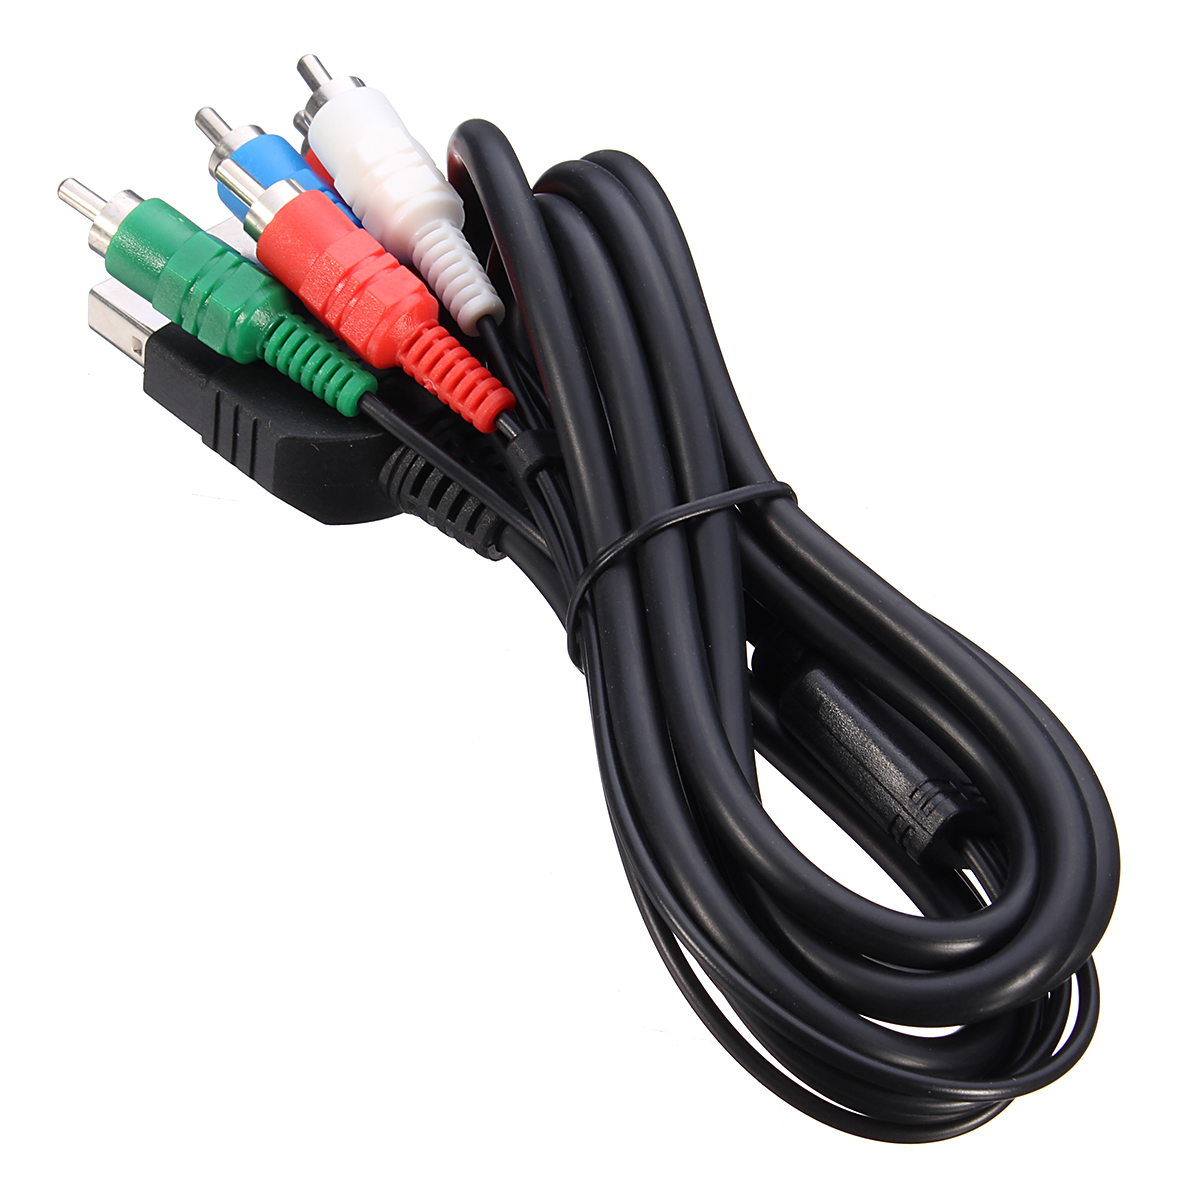 HD TV Component Composite 5 RCA AC Stereo Sound Audio Video Cable Cord for XBOX 39